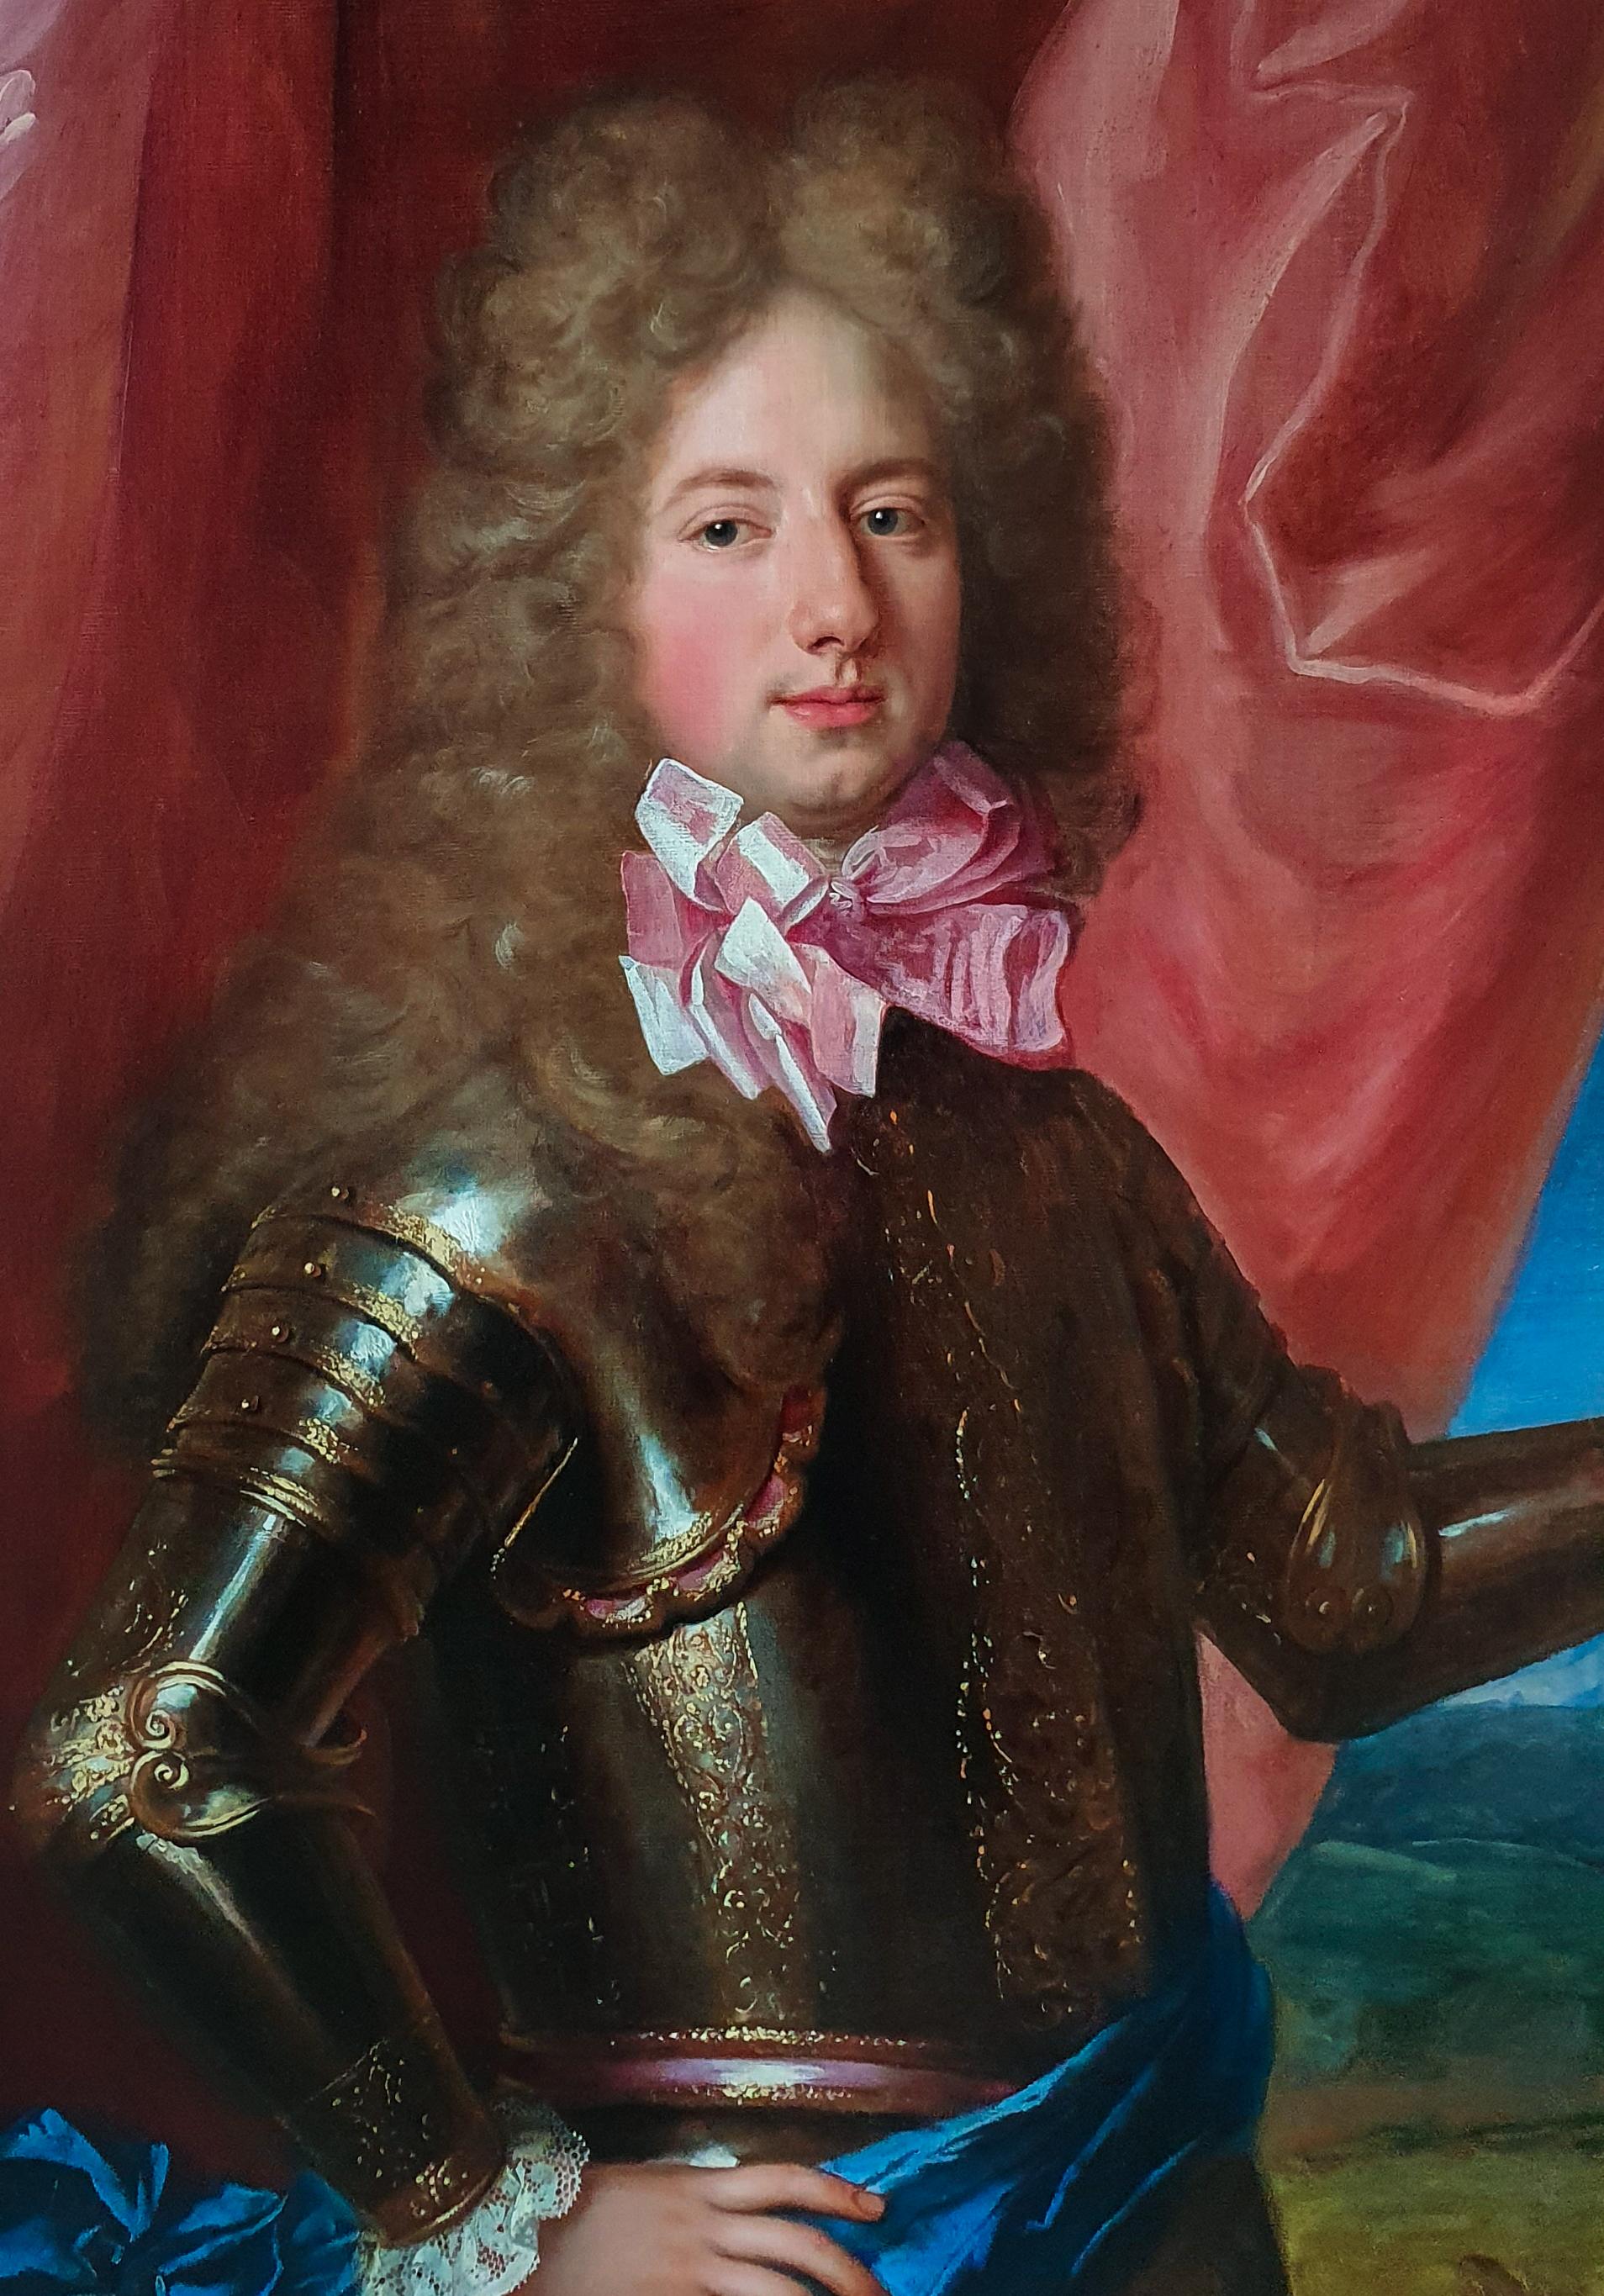 Portrait of a Young Nobleman in Armour 1690’s
Studio of Francois de Troy (1645-1730)

This exquisite work formed part of the collection of the Clan Macpherson’s at their historic seat, Cluny Castle, at Laggan near Newtonmore Scotland.  The painting